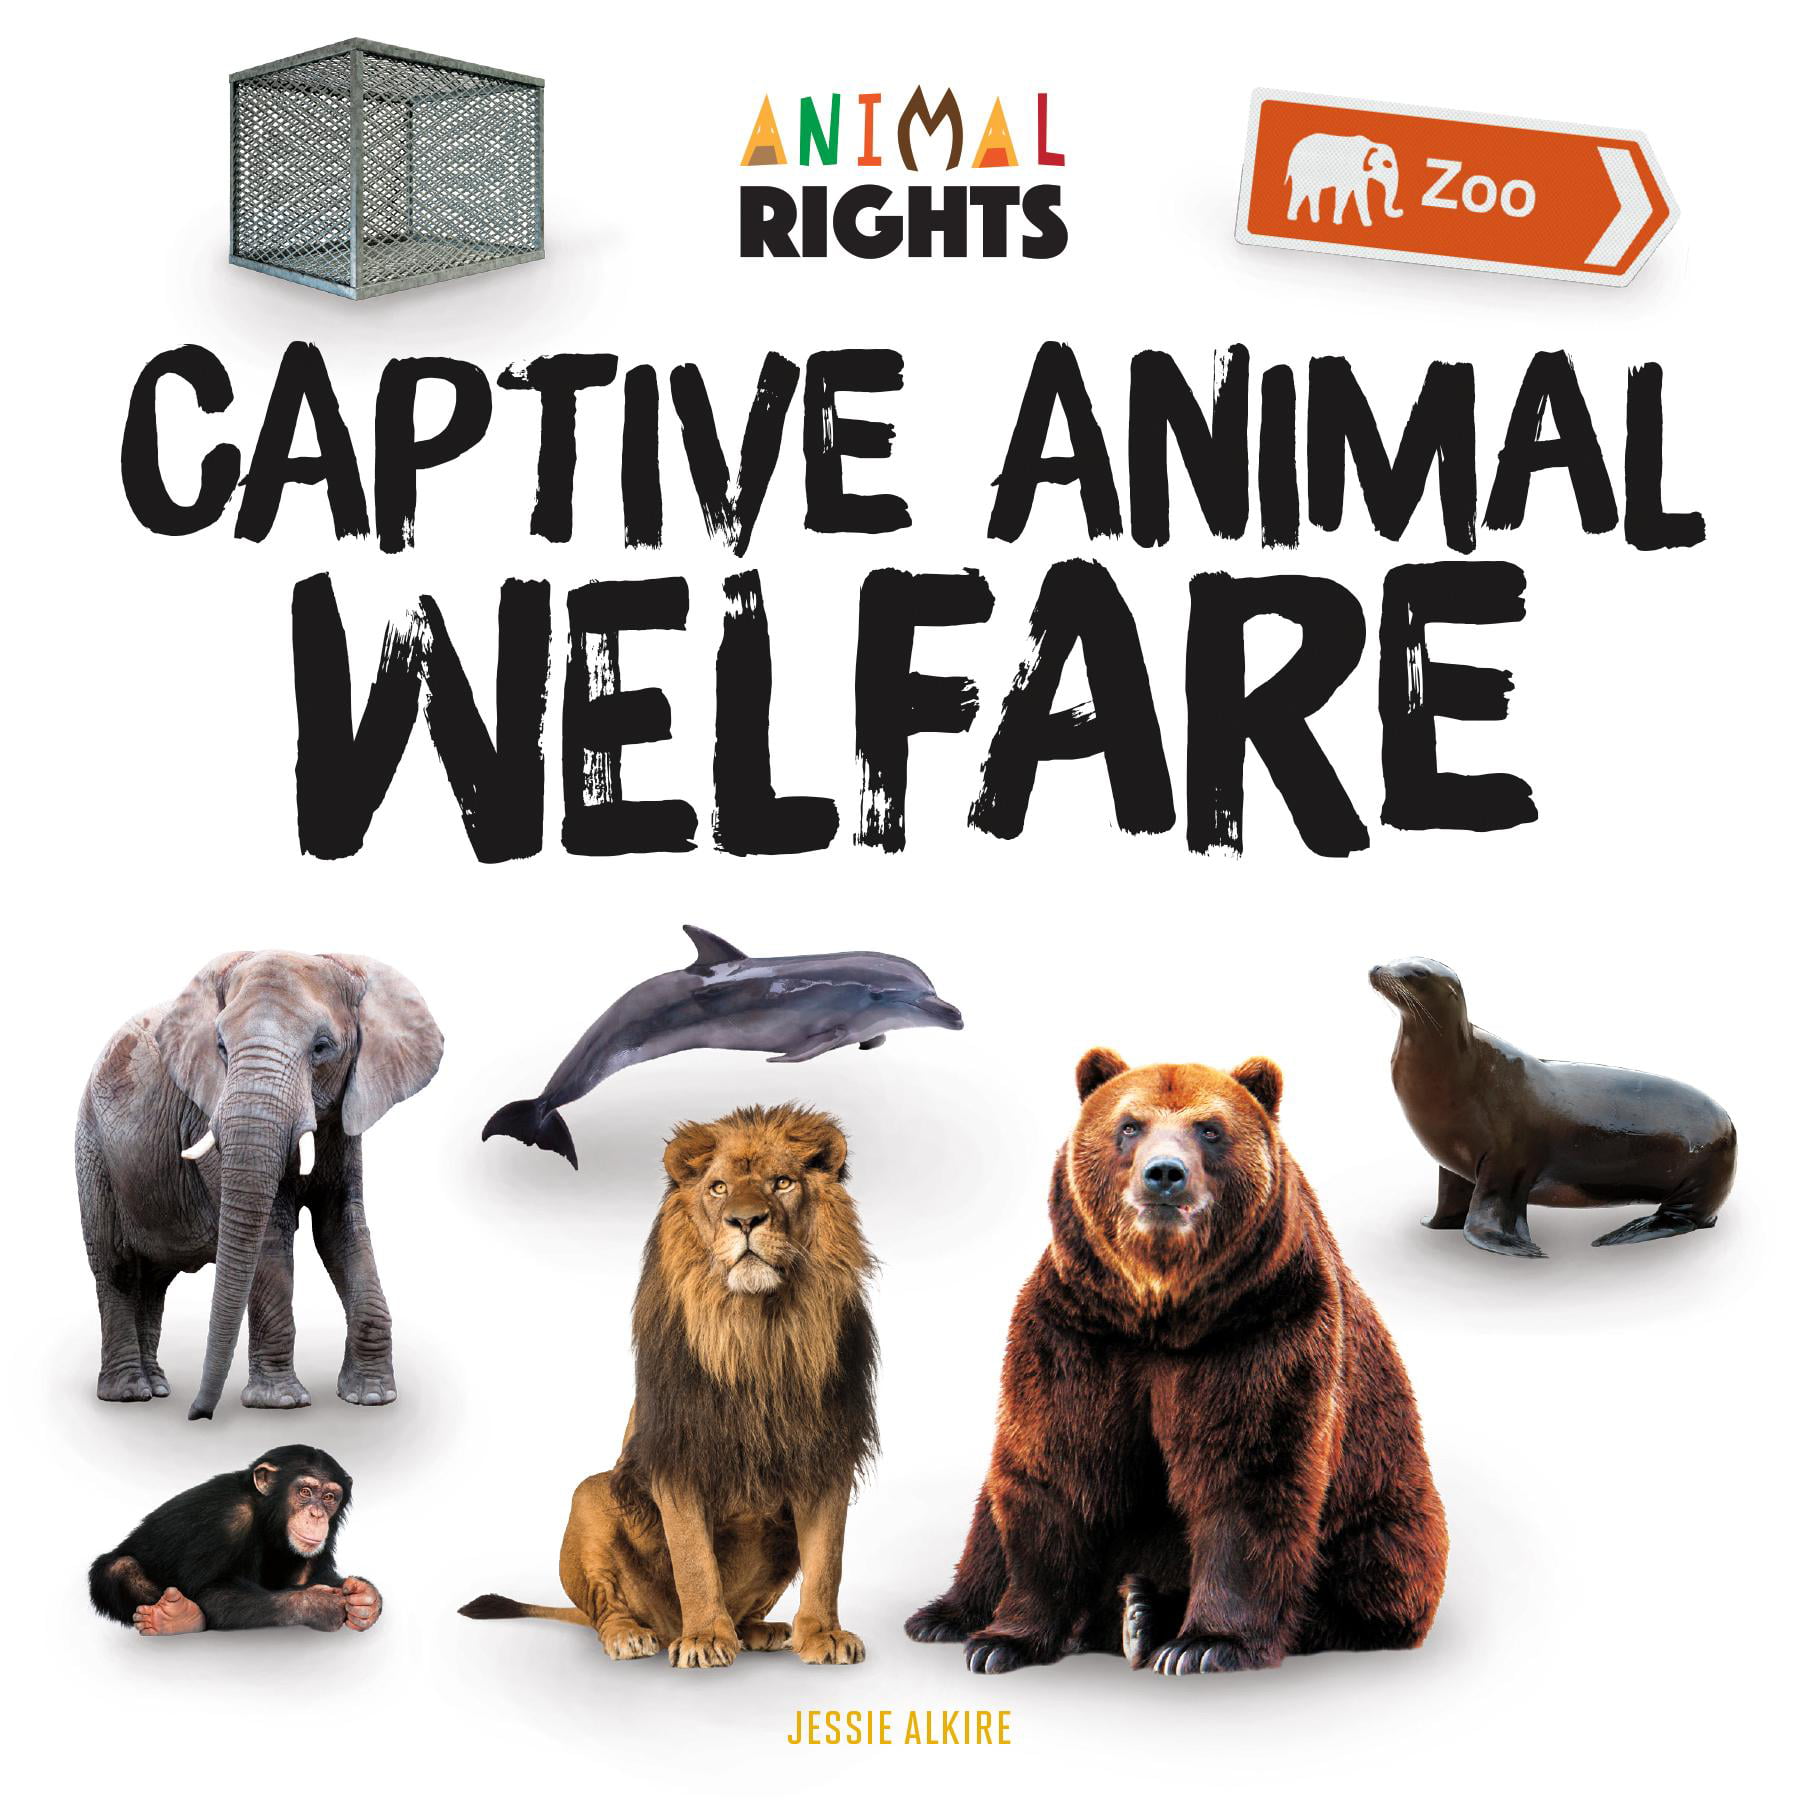 concept paper about animal welfare and rights